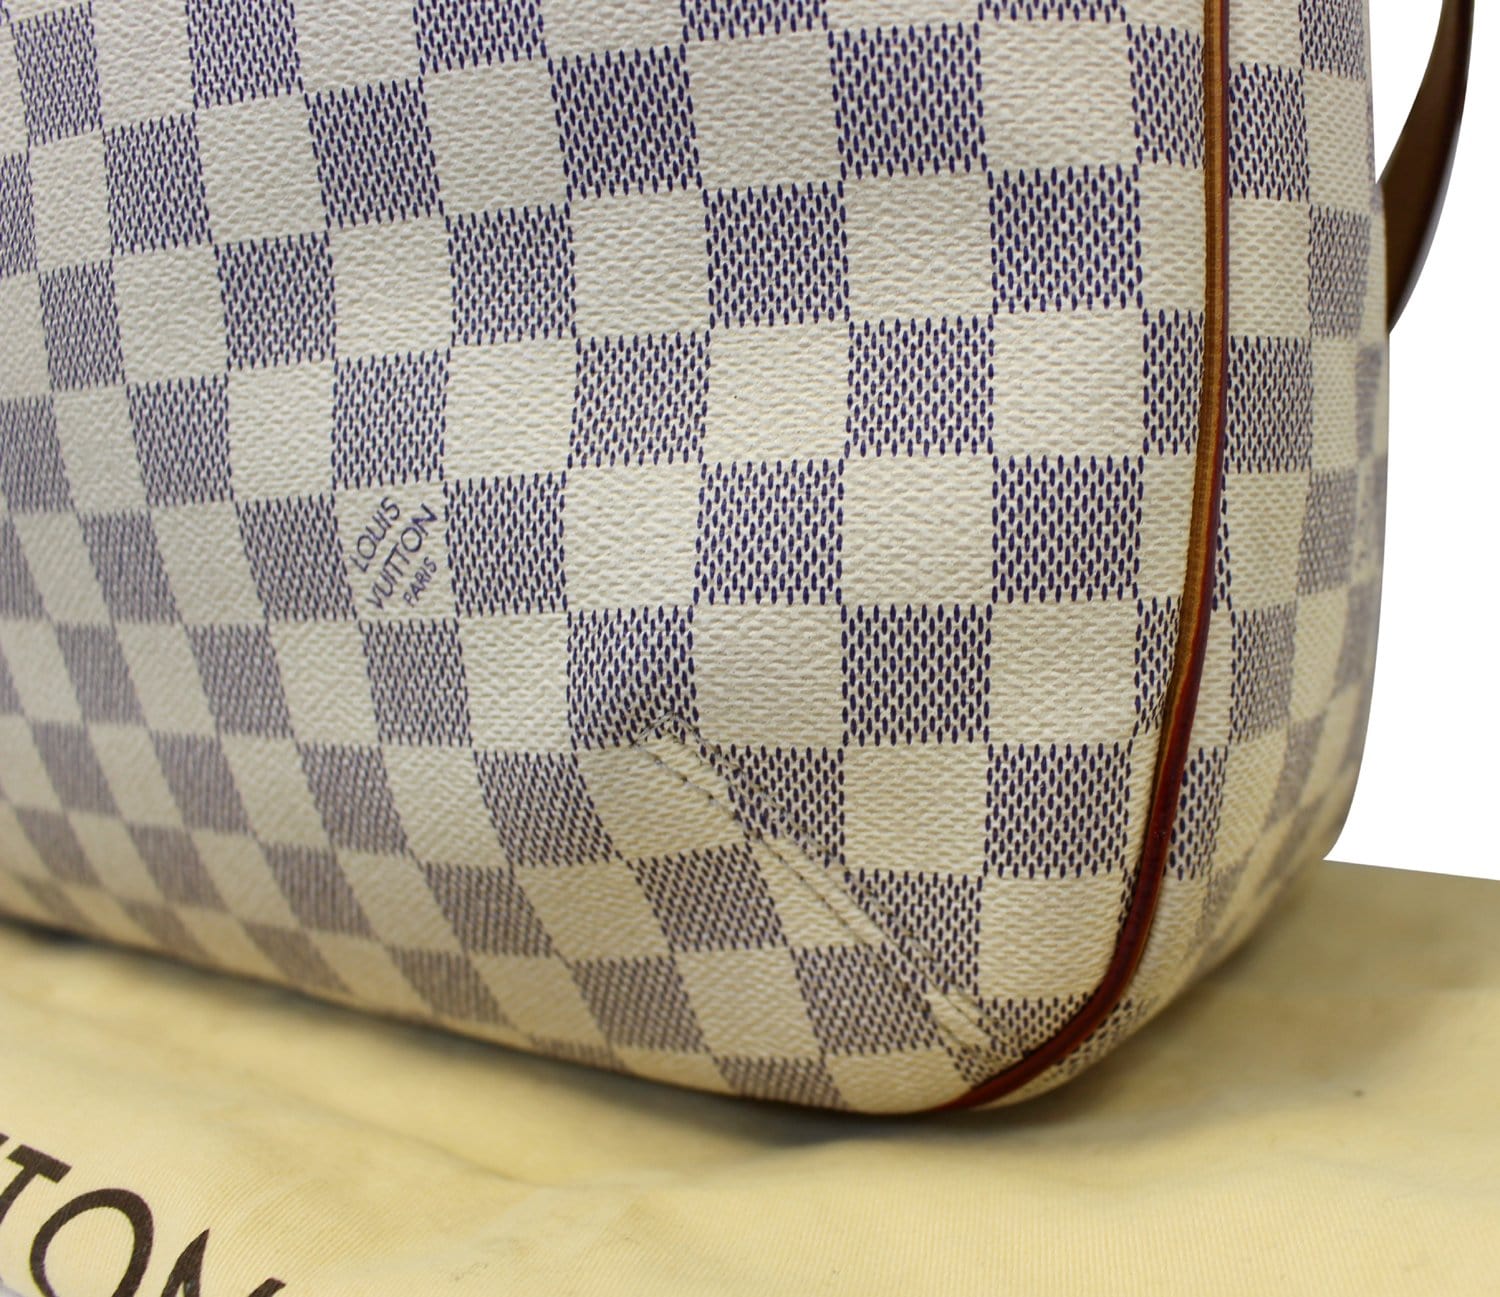 New Louis Vuitton Damier Azur Soffi, Just saw it on the store and it is  Gorgeus!!!!